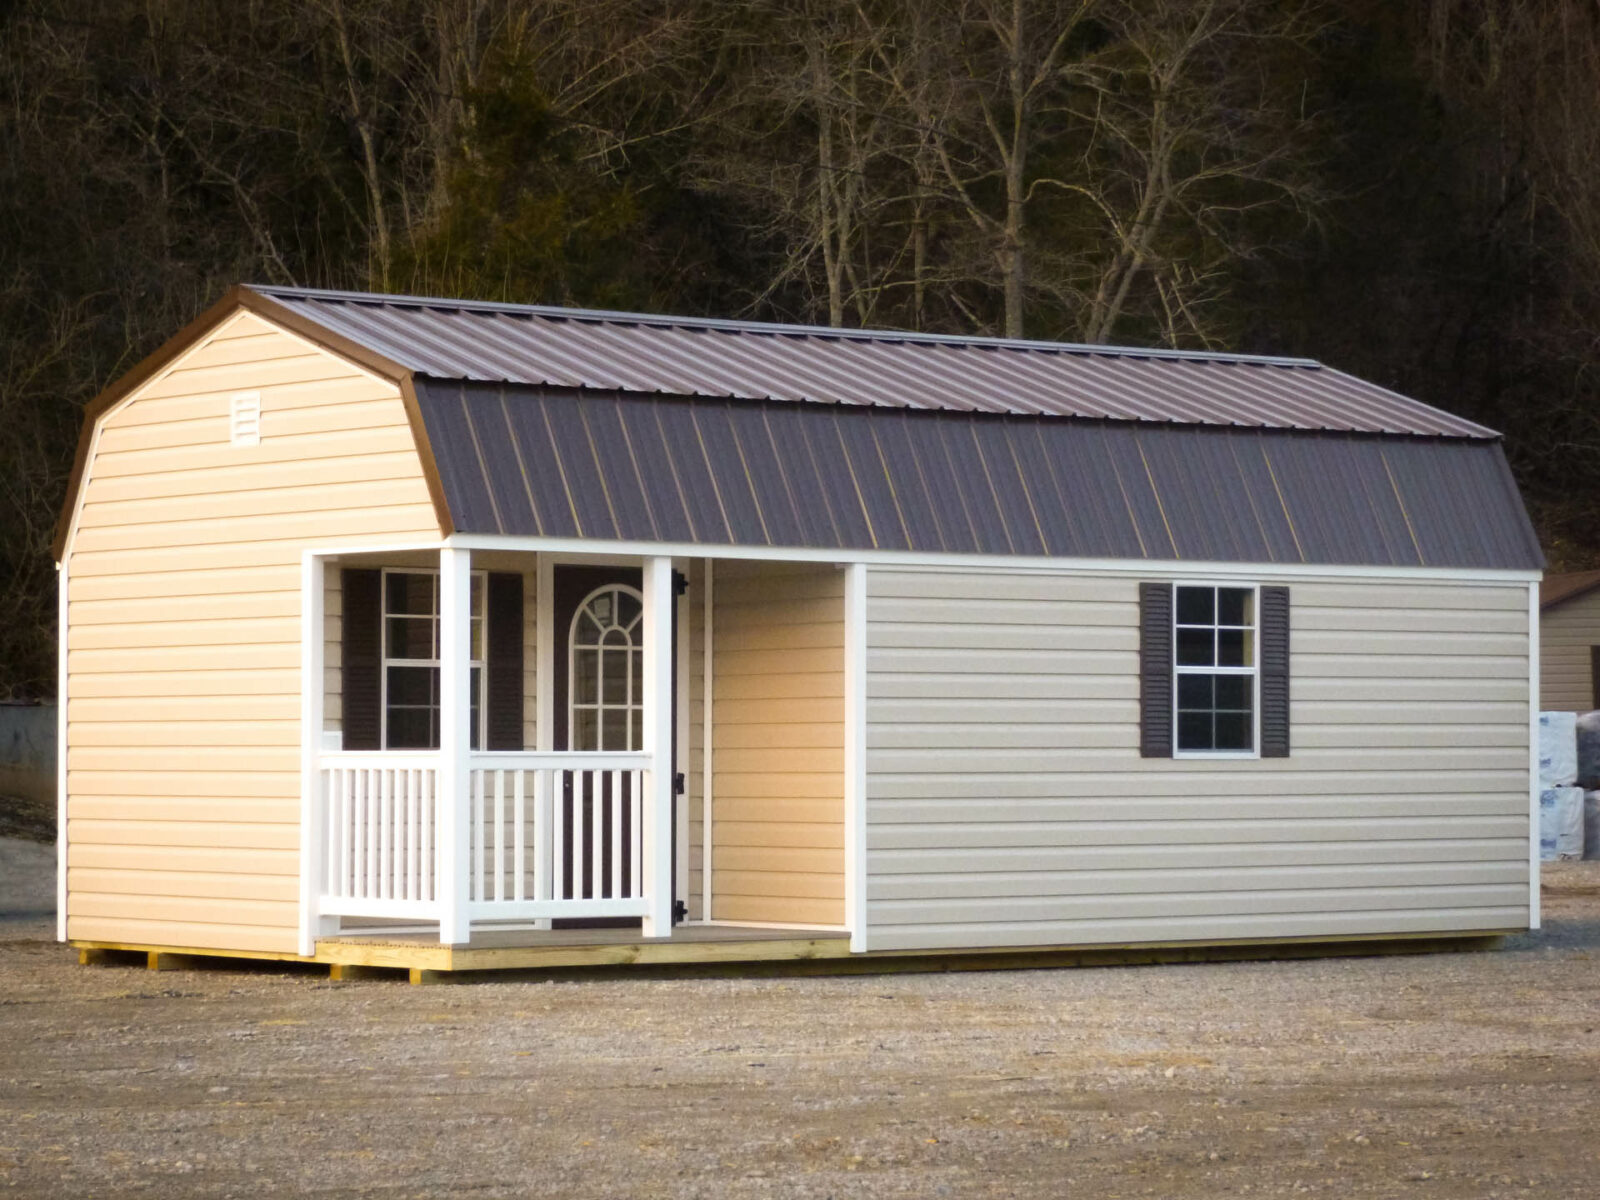 Vinyl office shed with a porch in Kentucky